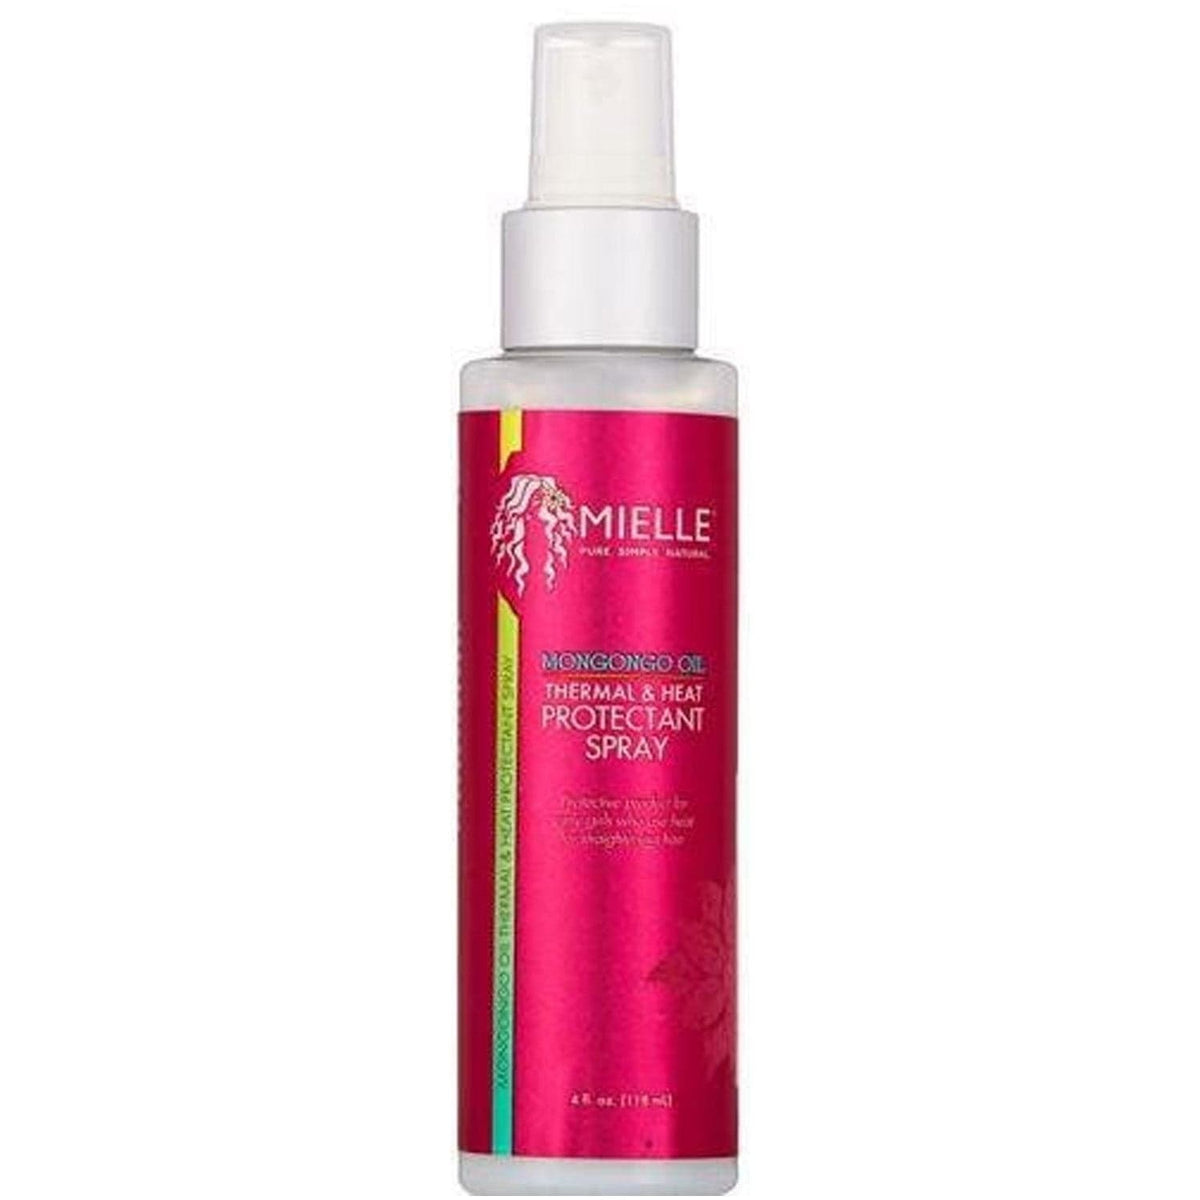 MIELLE MONGONGO OIL THERMAL & HEAT PROTECTANT SPRAY 4fl.oz.